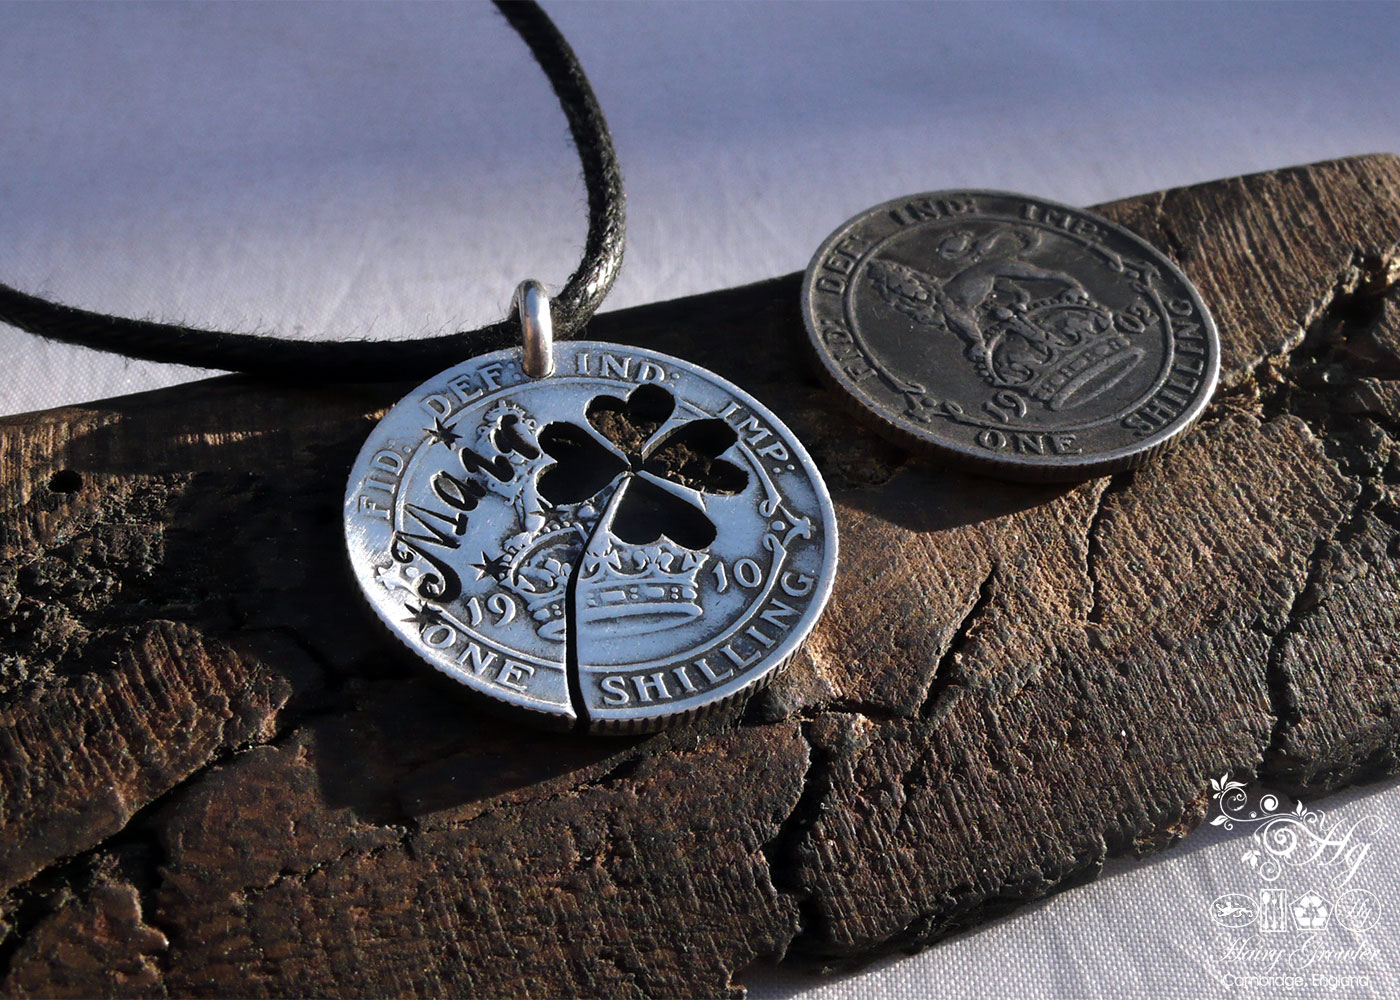 Handcrafted and recycled lucky silver shilling coin necklace pendant